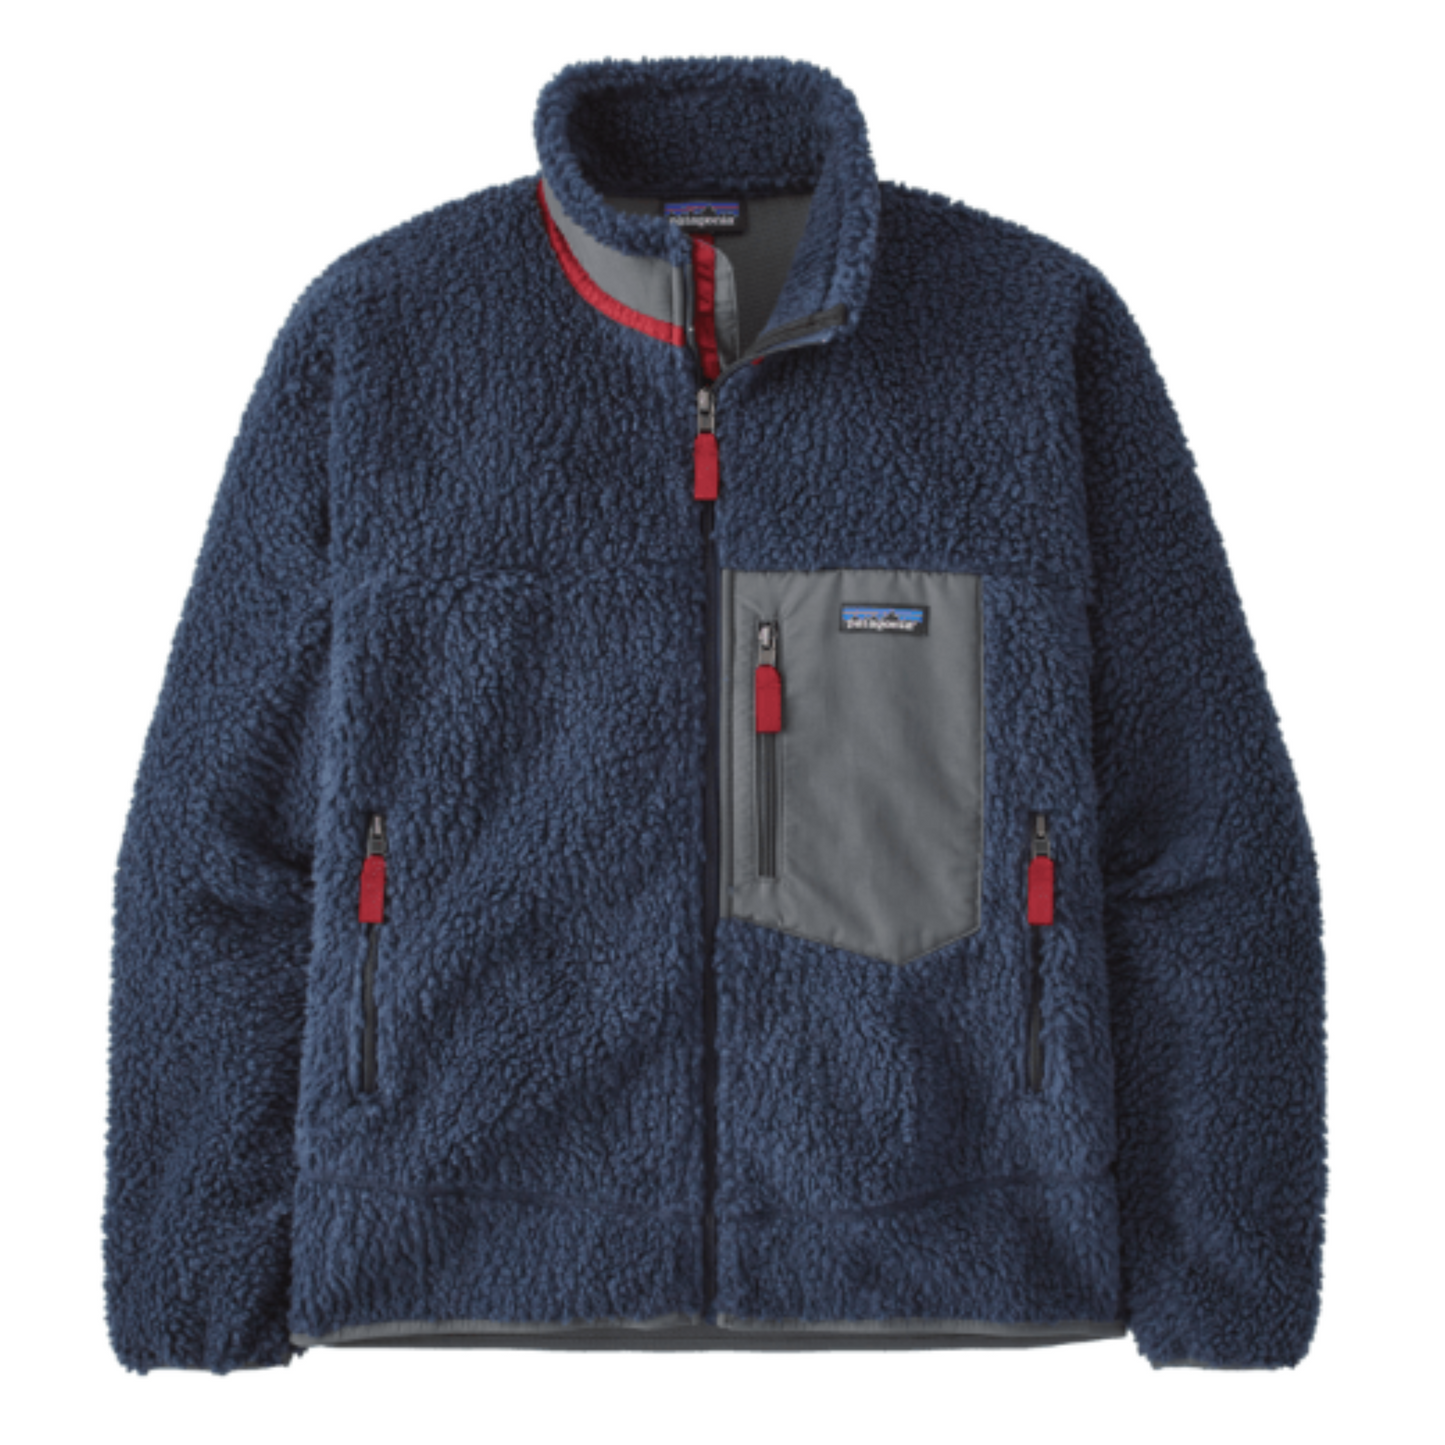 Patagonia Men's Classic Retro-X jacket in navy and red